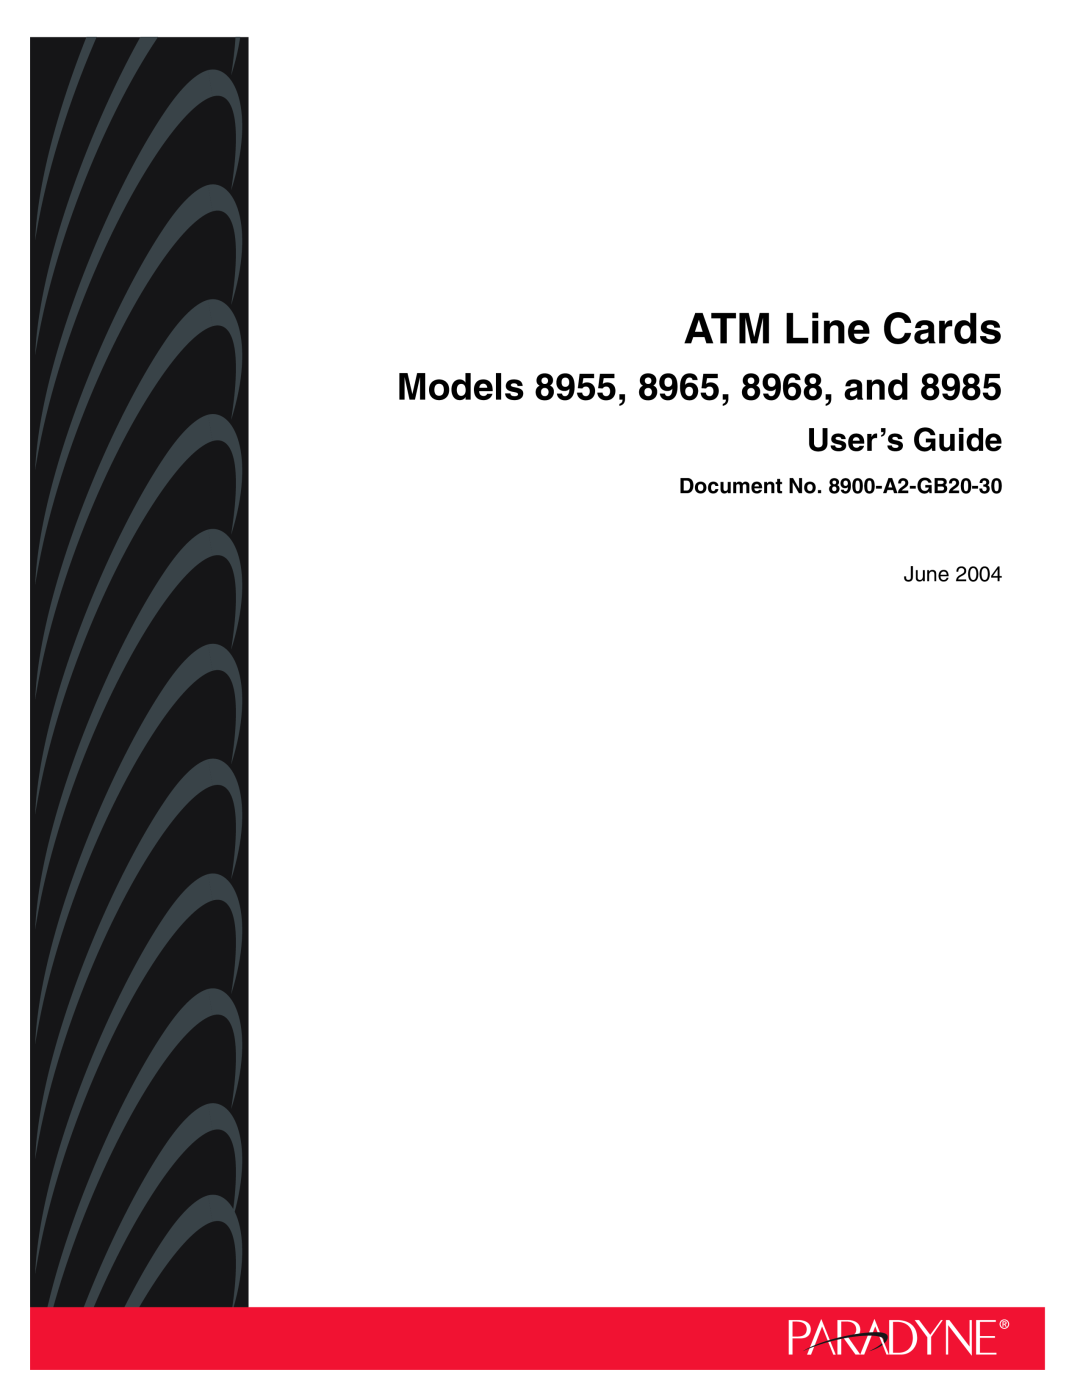 Paradyne manual ATM Line Cards, Models 8955, 8965, 8968, and, User’s Guide, Document No. 8900-A2-GB20-30, June 